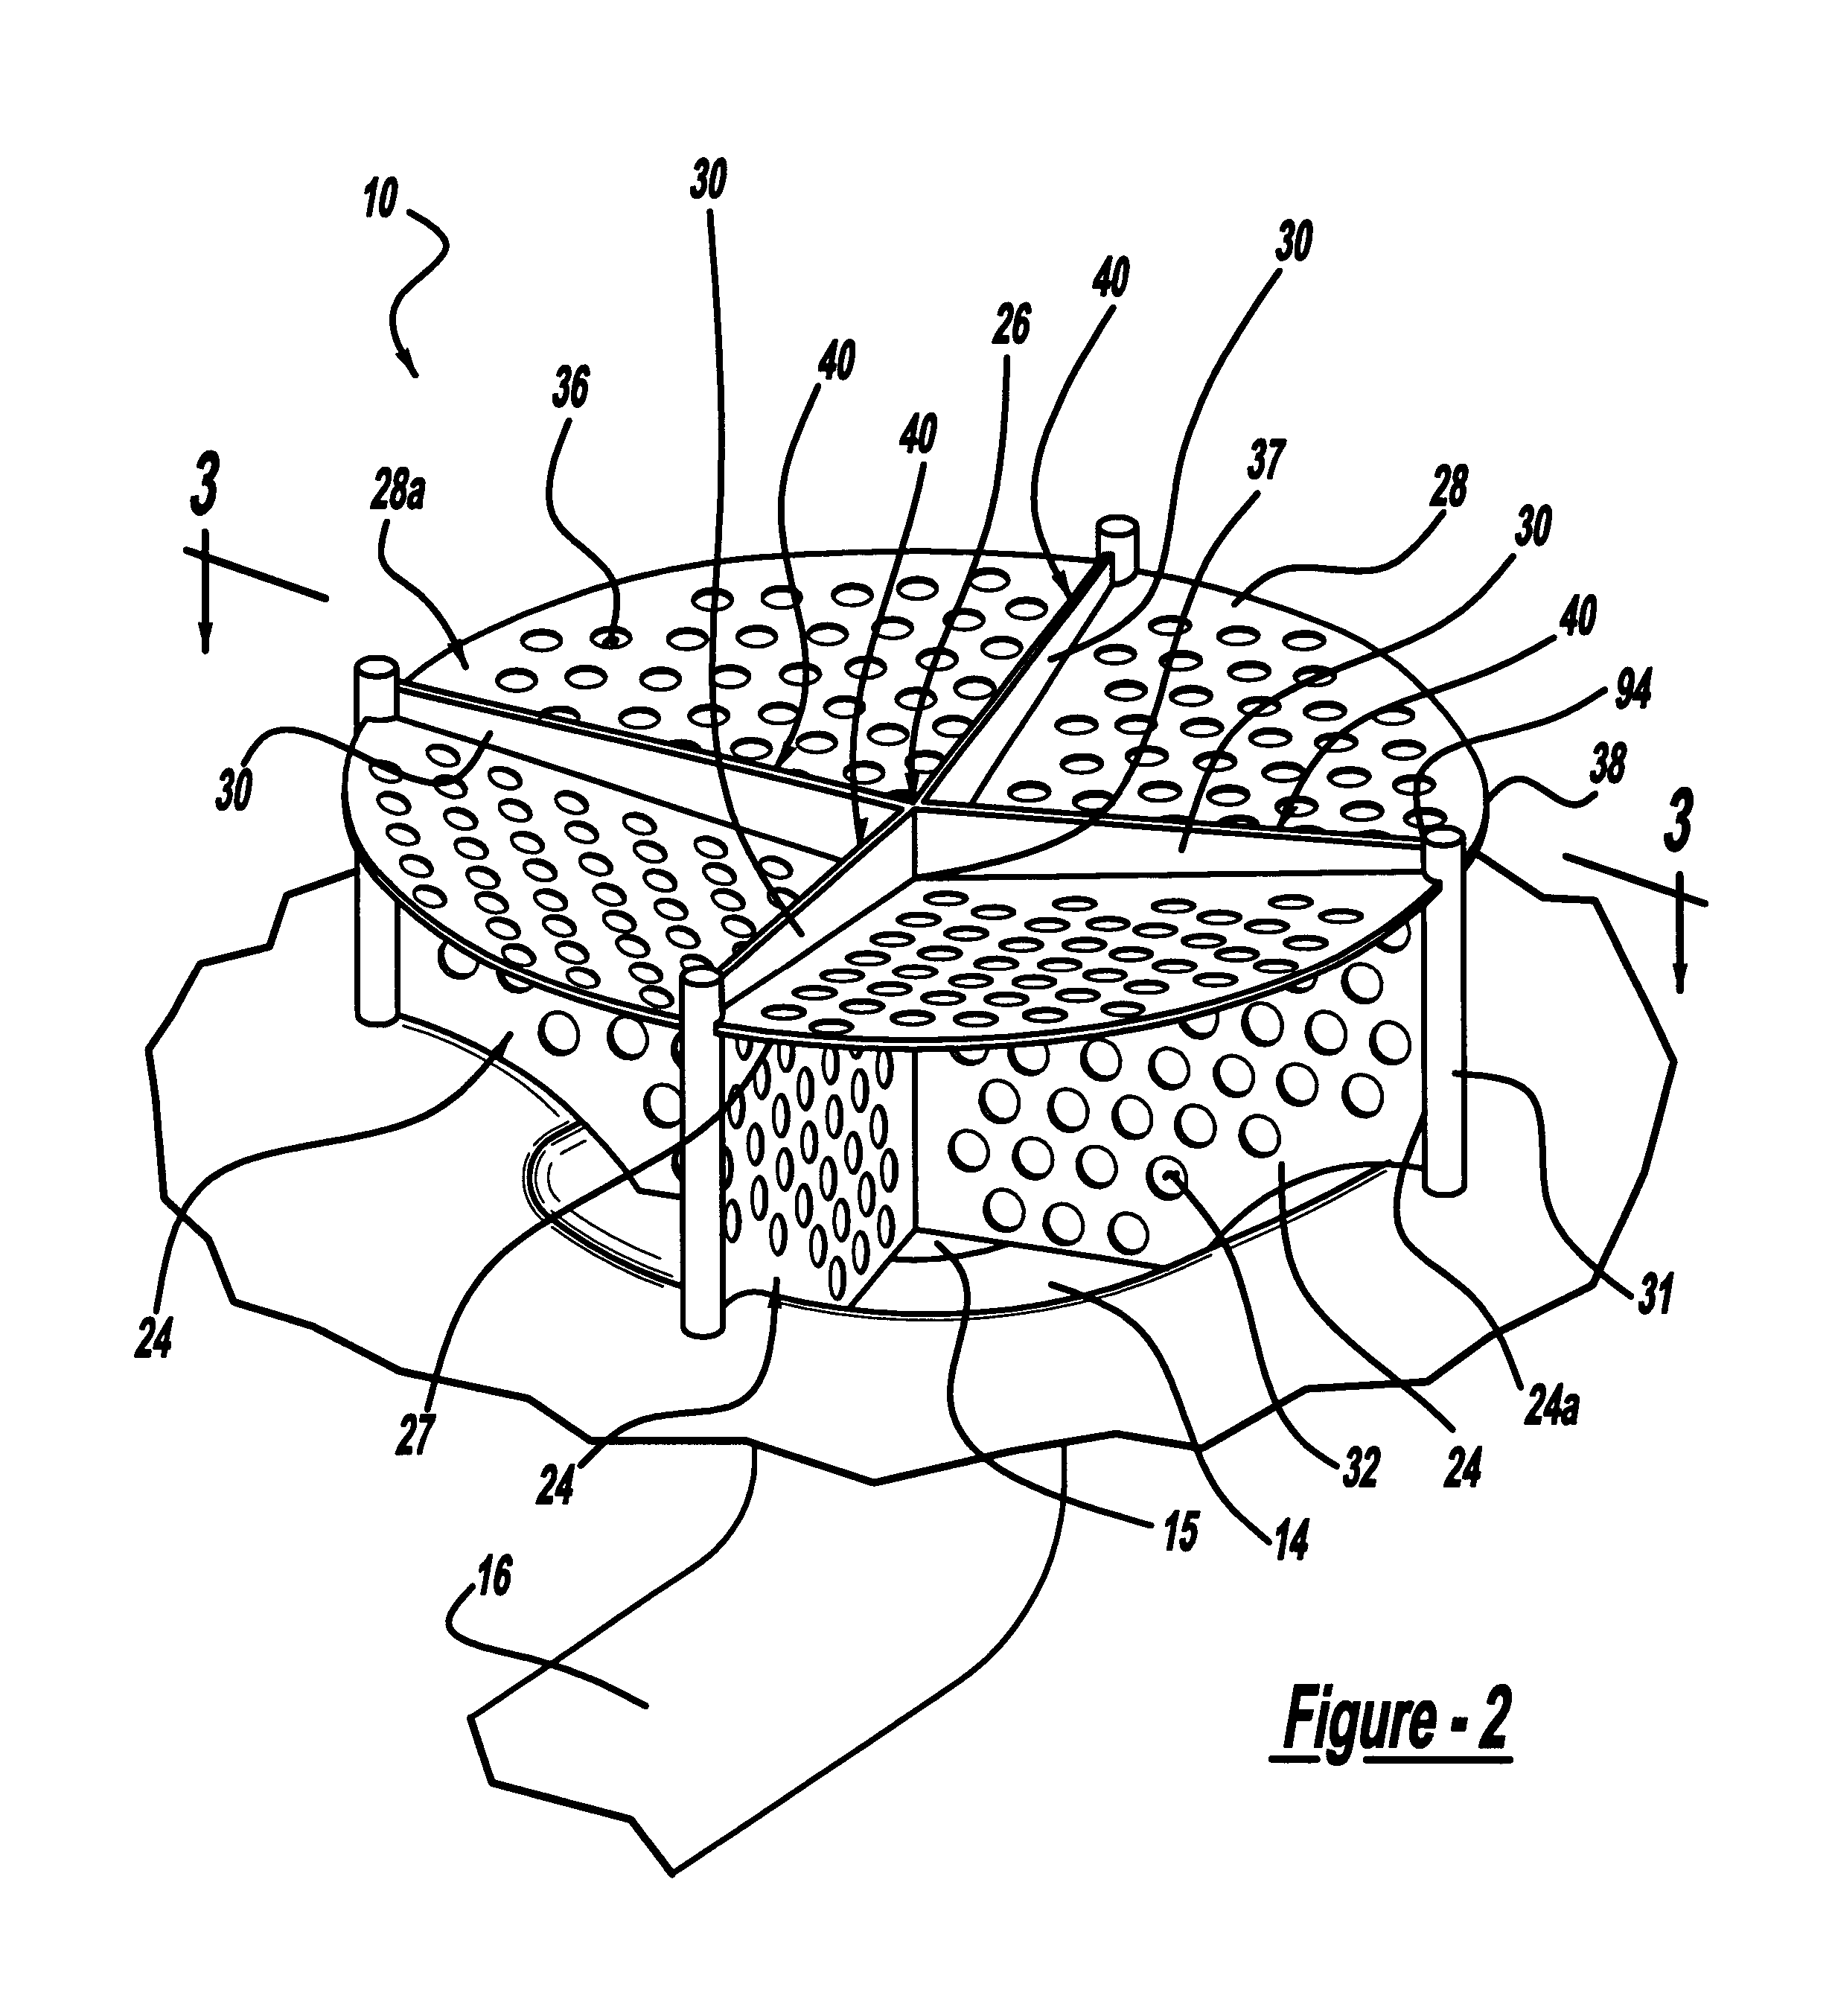 Variable-gravity anti-vortex and vapor-ingestion-suppression device